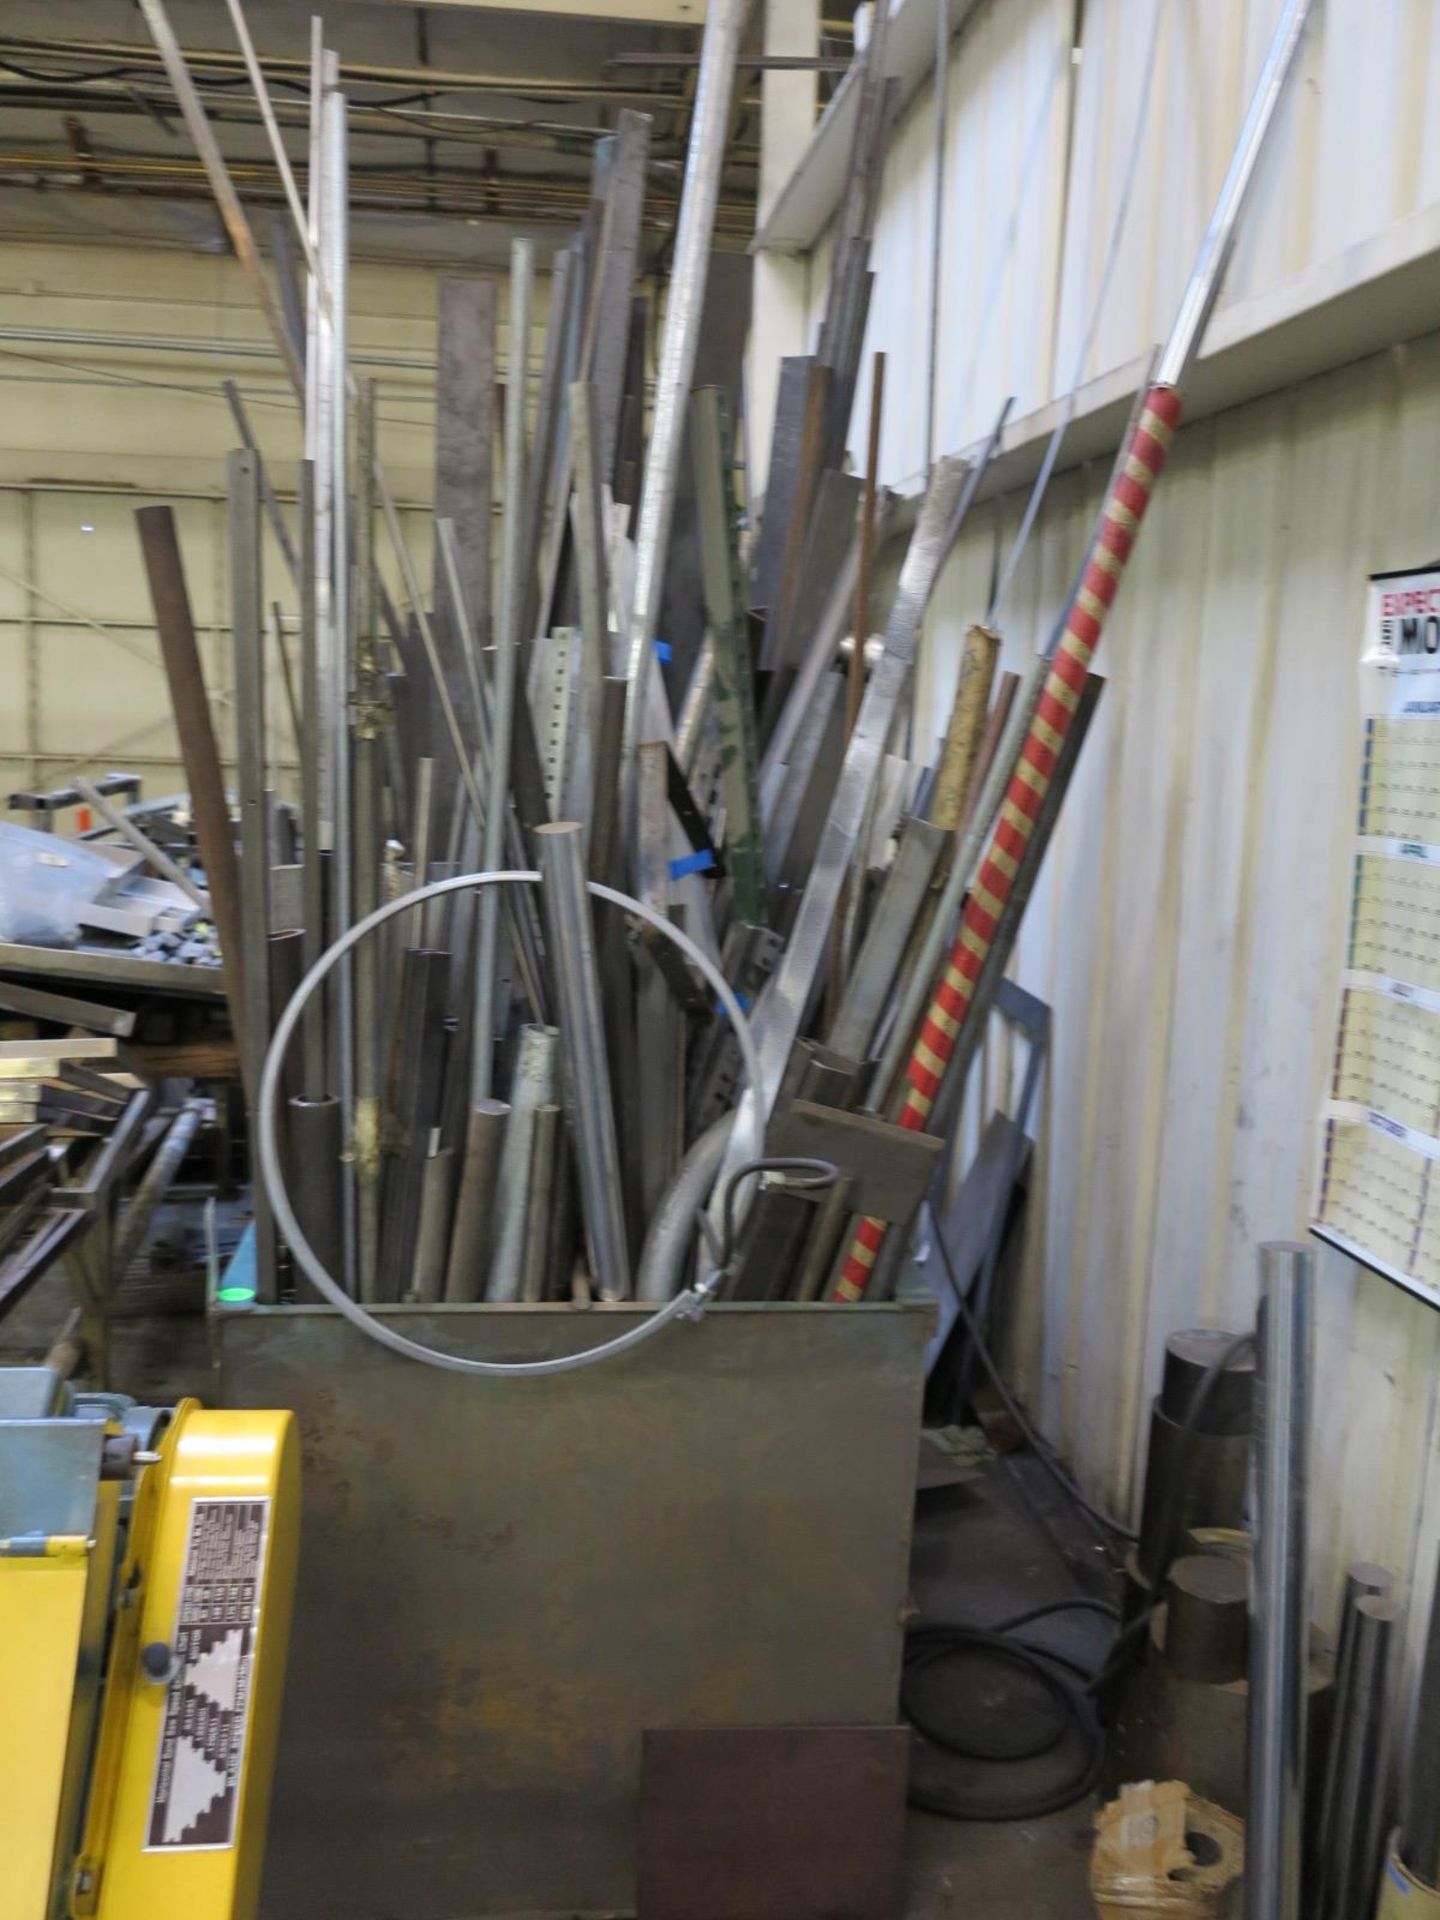 LOT - 6' X 3' RACK OF USEABLE LENGTHS OF STEEL BAR, CHANNEL, ANGLE, PIPE, ALUMINUM, S.S. ROUNDS,